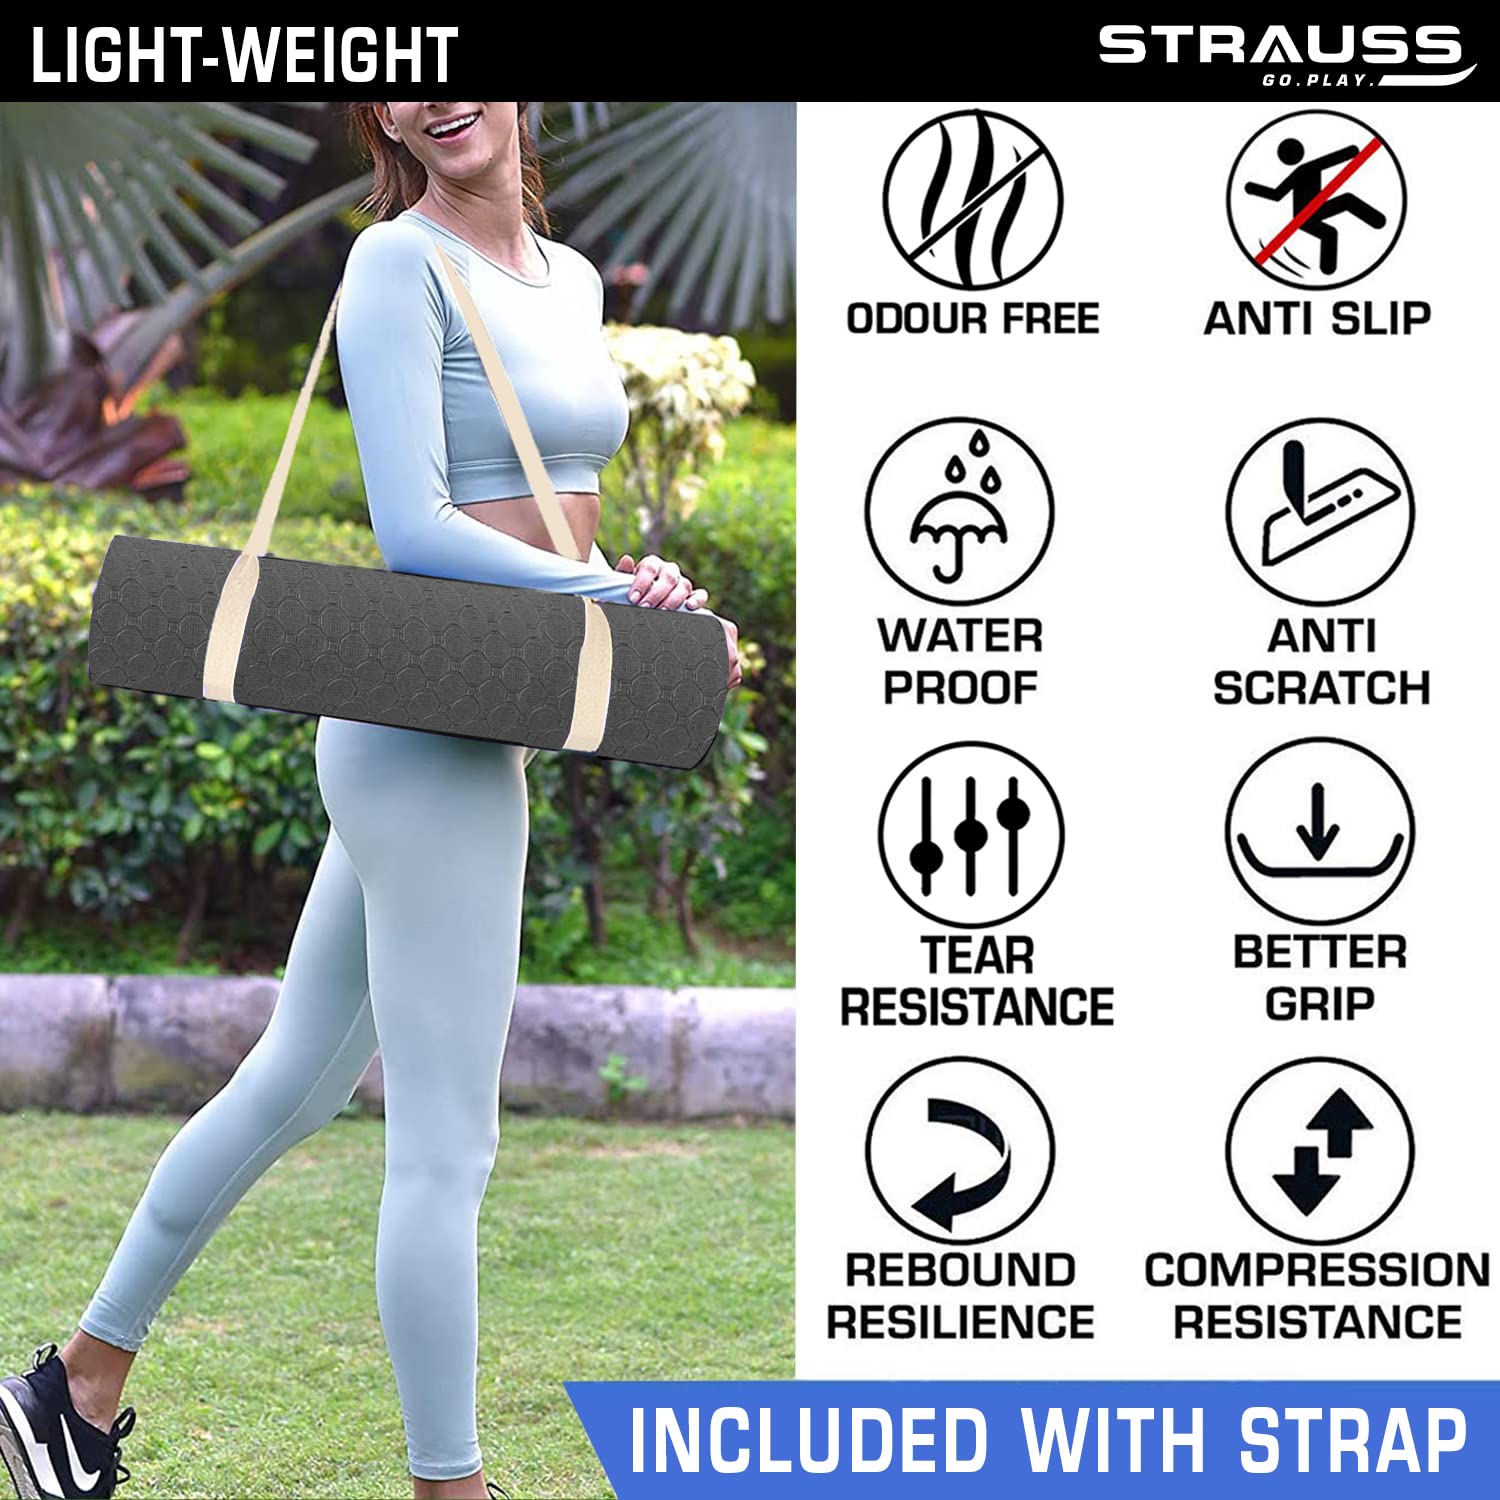 Strauss Exercise Yoga Mat with Carry Bag